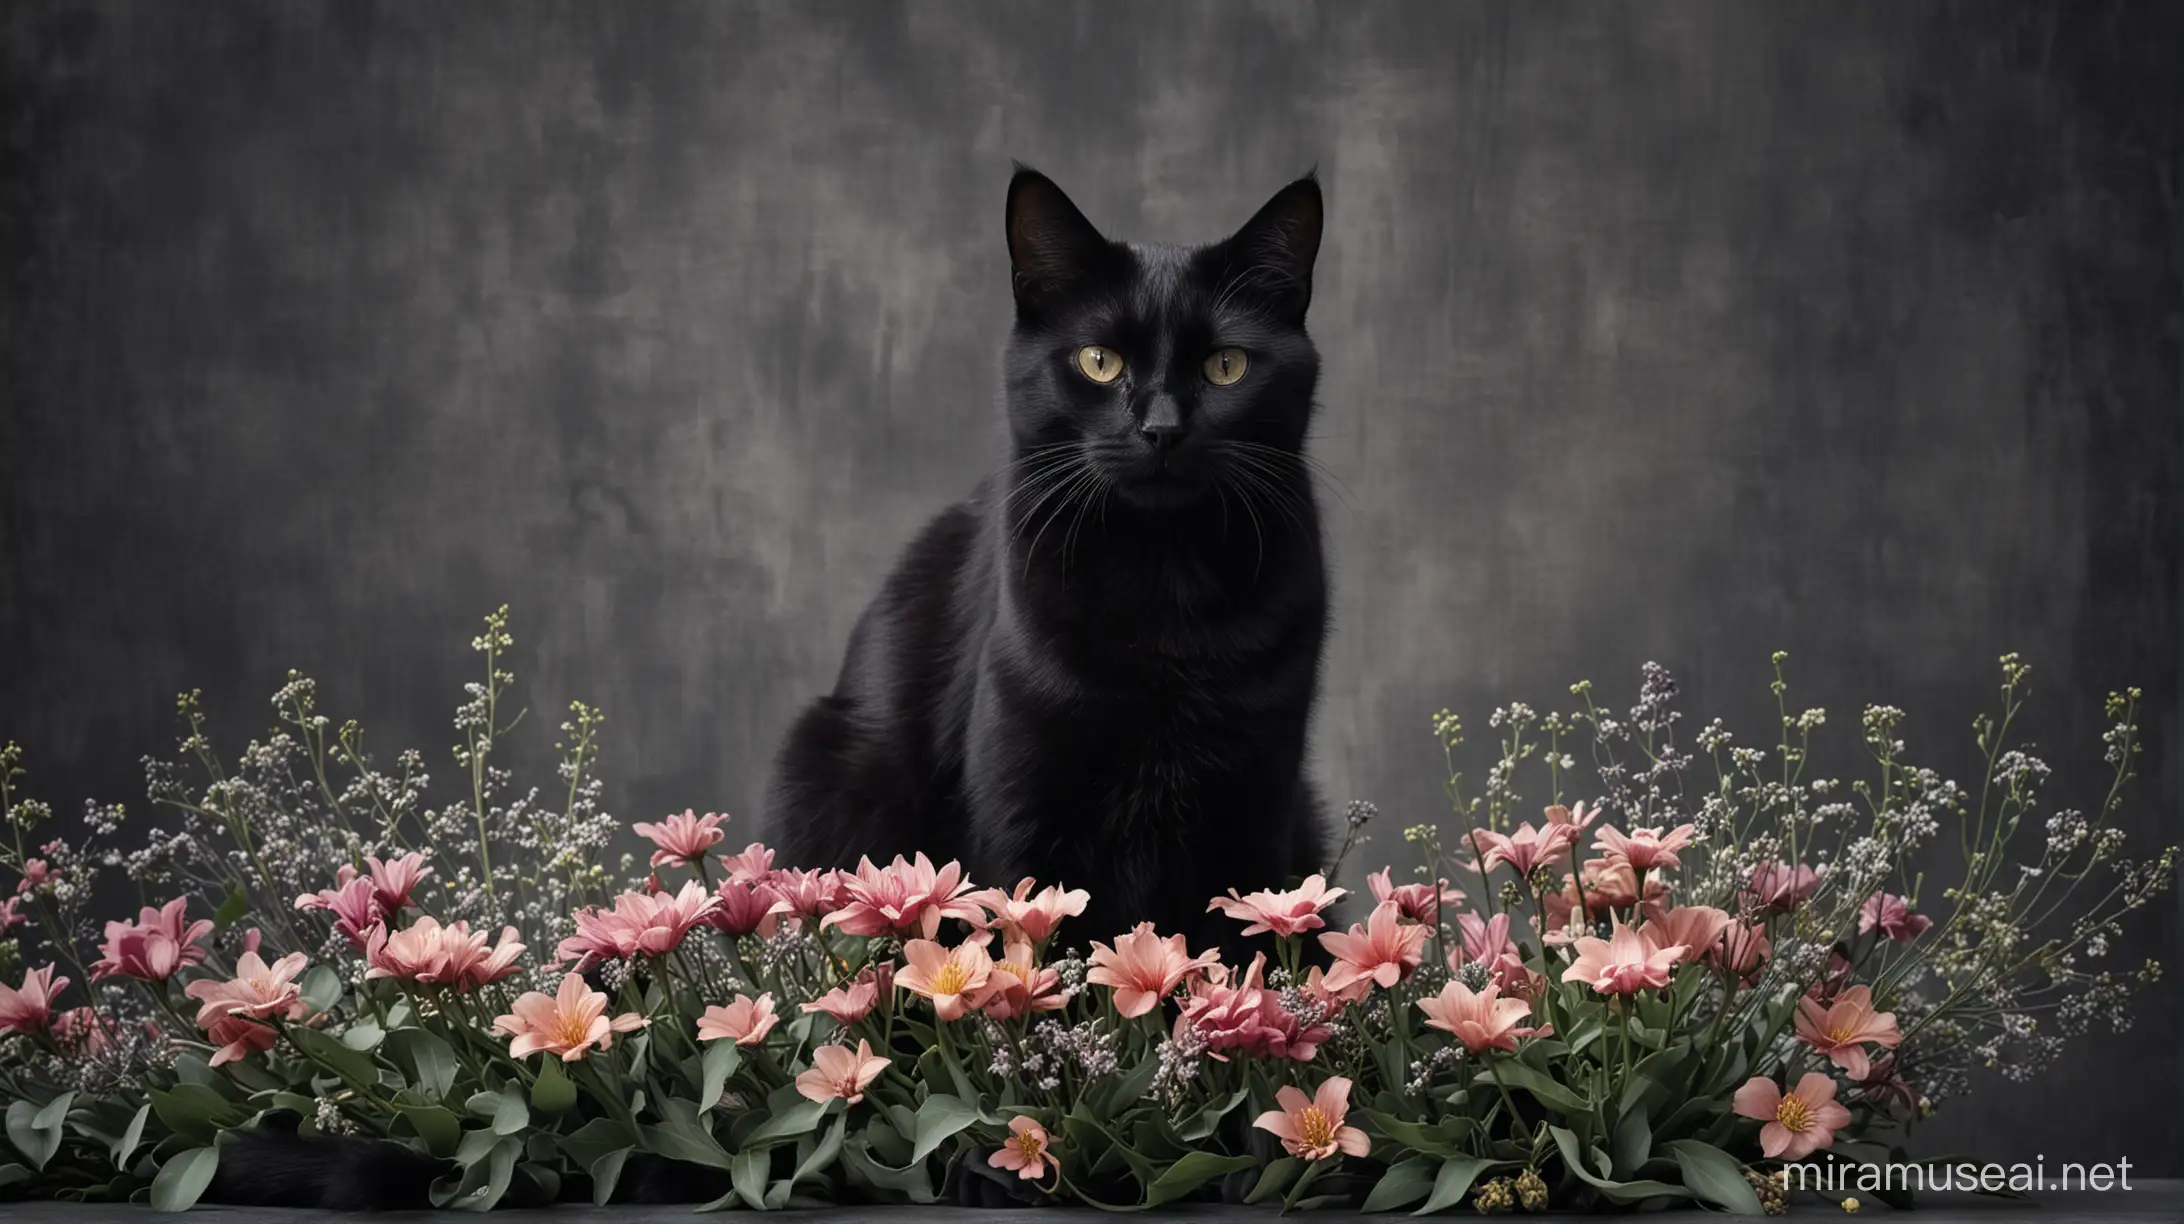 Elegant Black Cat Amidst Delicate Flowers Capturing Moments in HighQuality Art